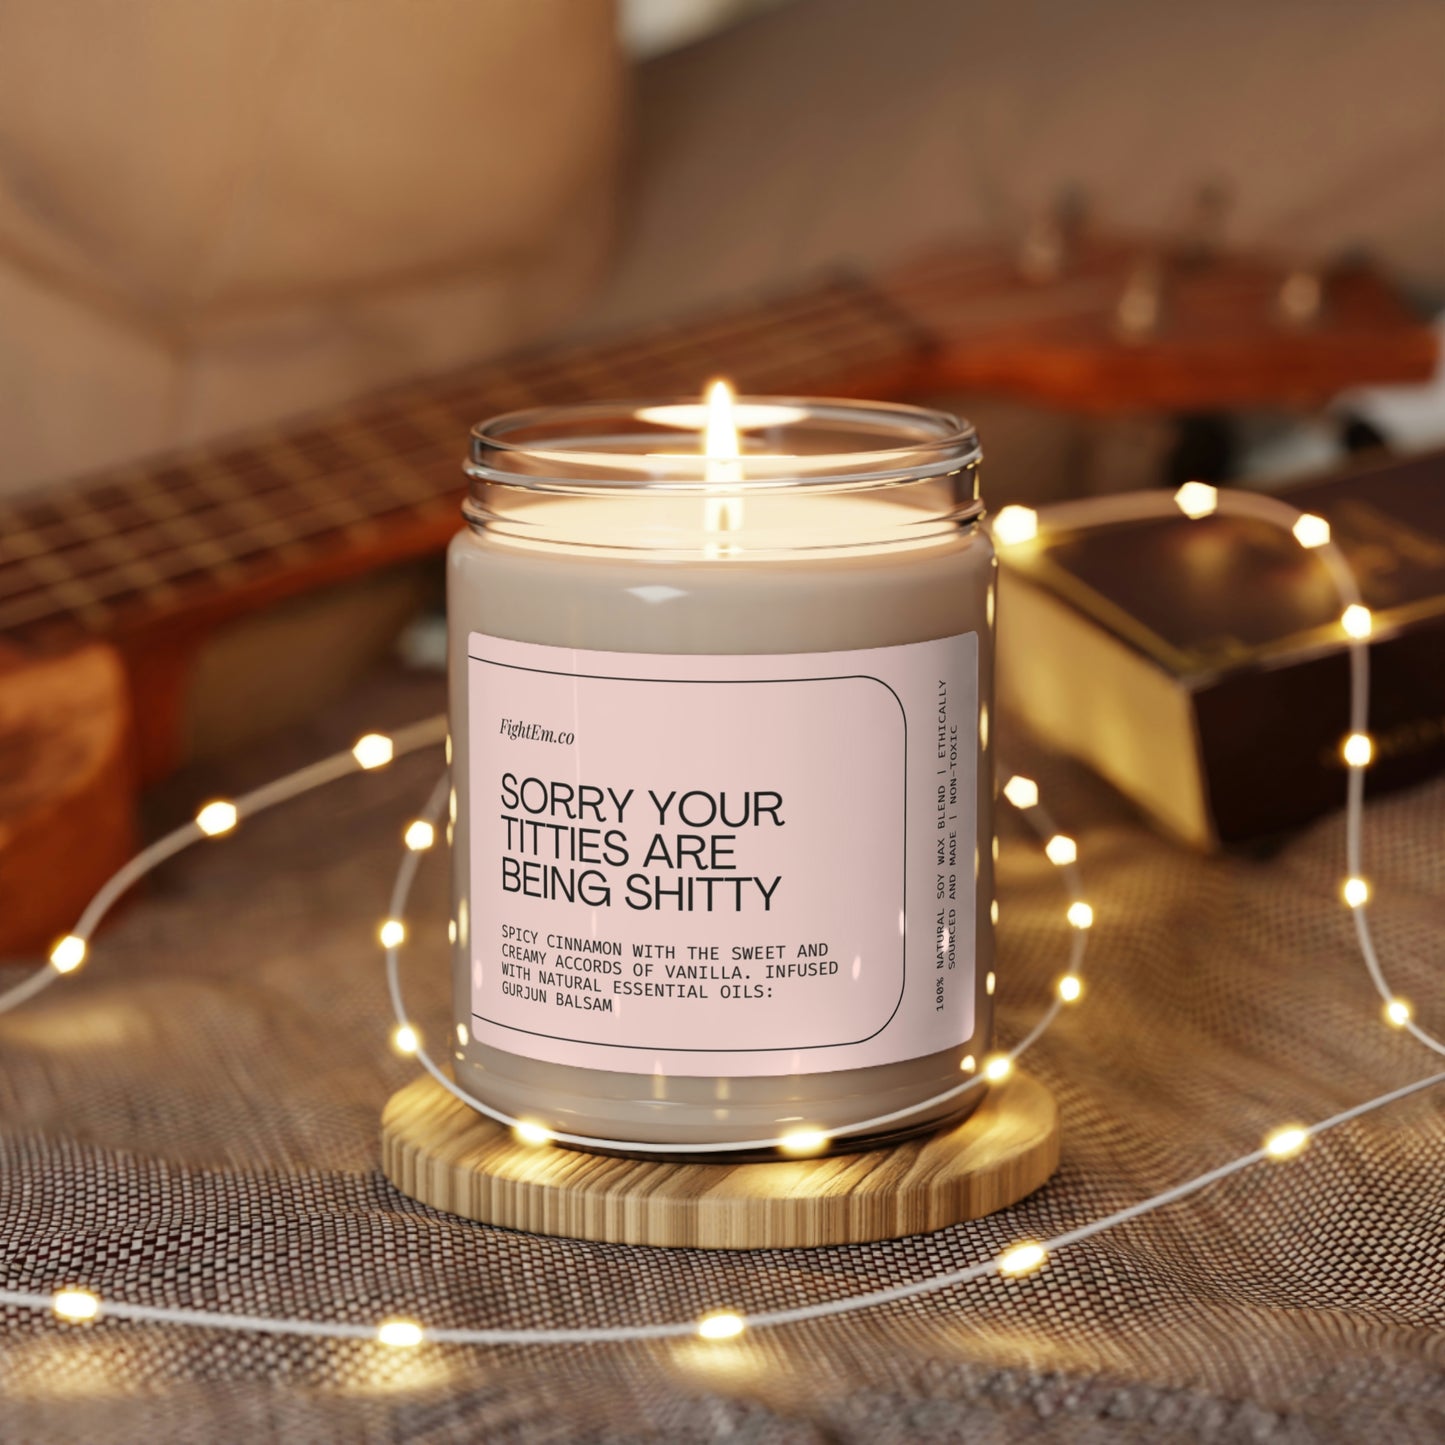 Sorry Your Titties Are Being Shitty Scented Soy Candle 9oz 100% Natural Soy Wax Blend